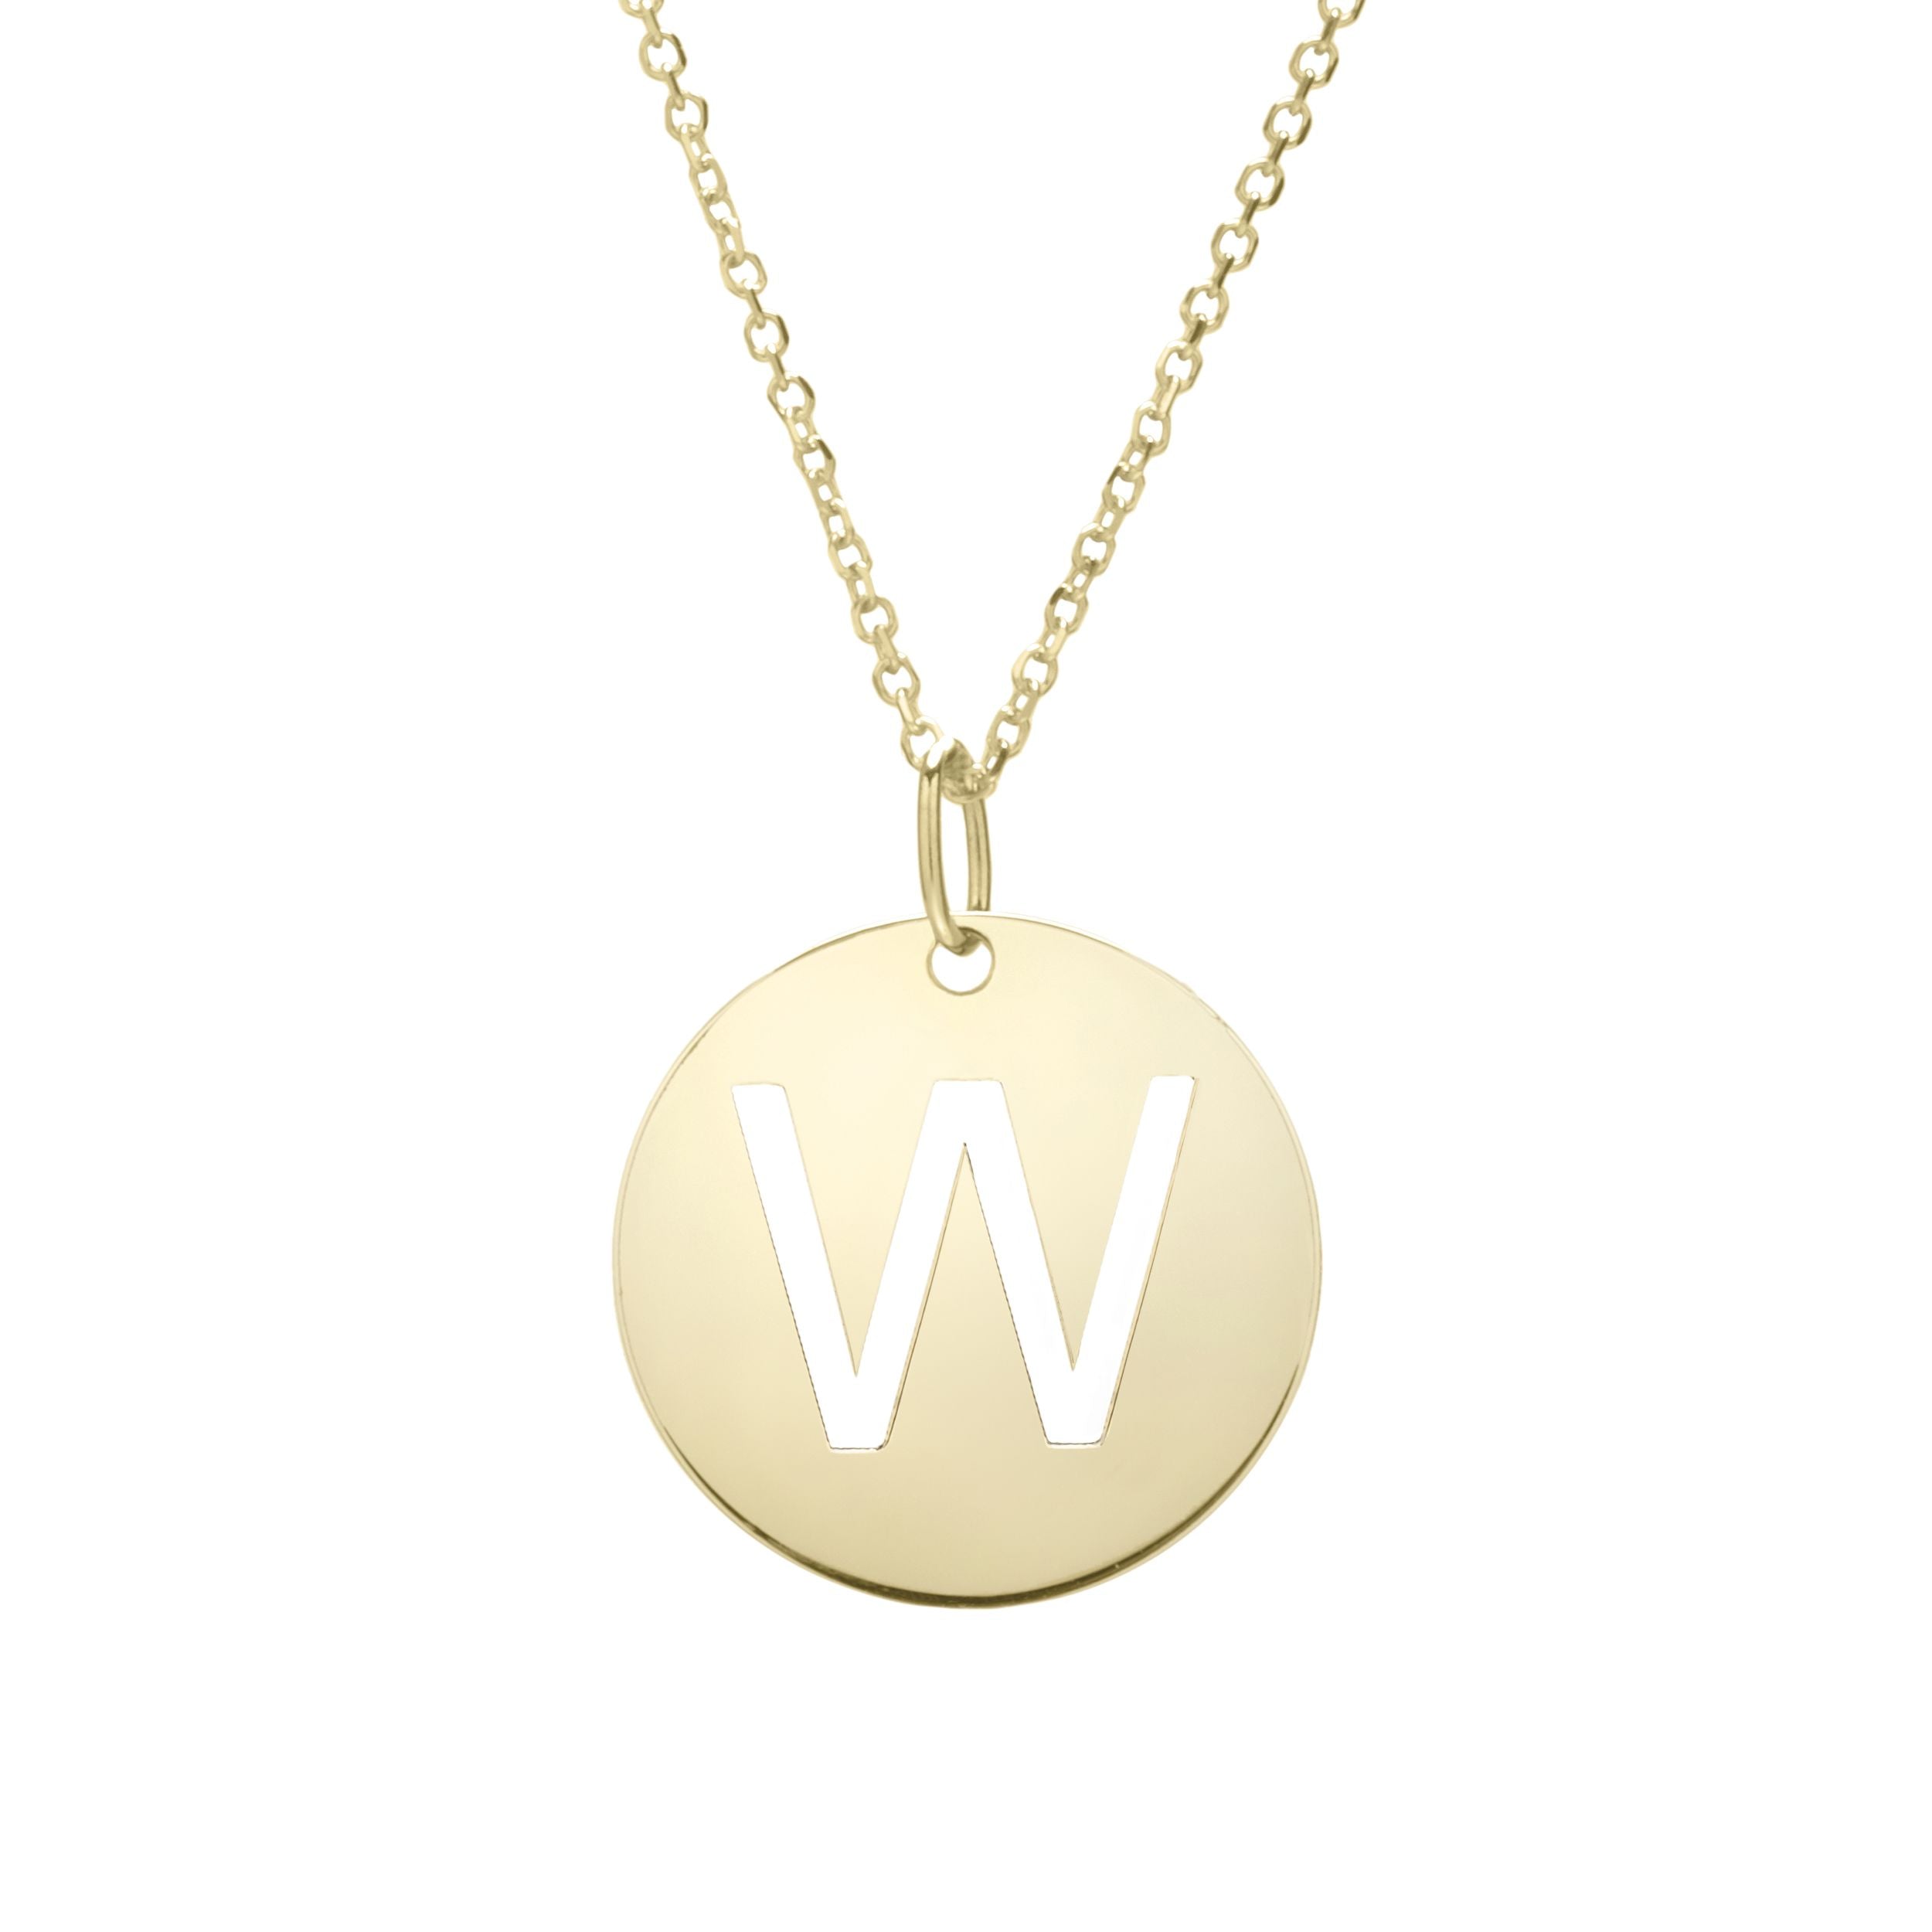 Beautiful Finished Personalized Initial Alphabet Necklace - wingroupjewelry